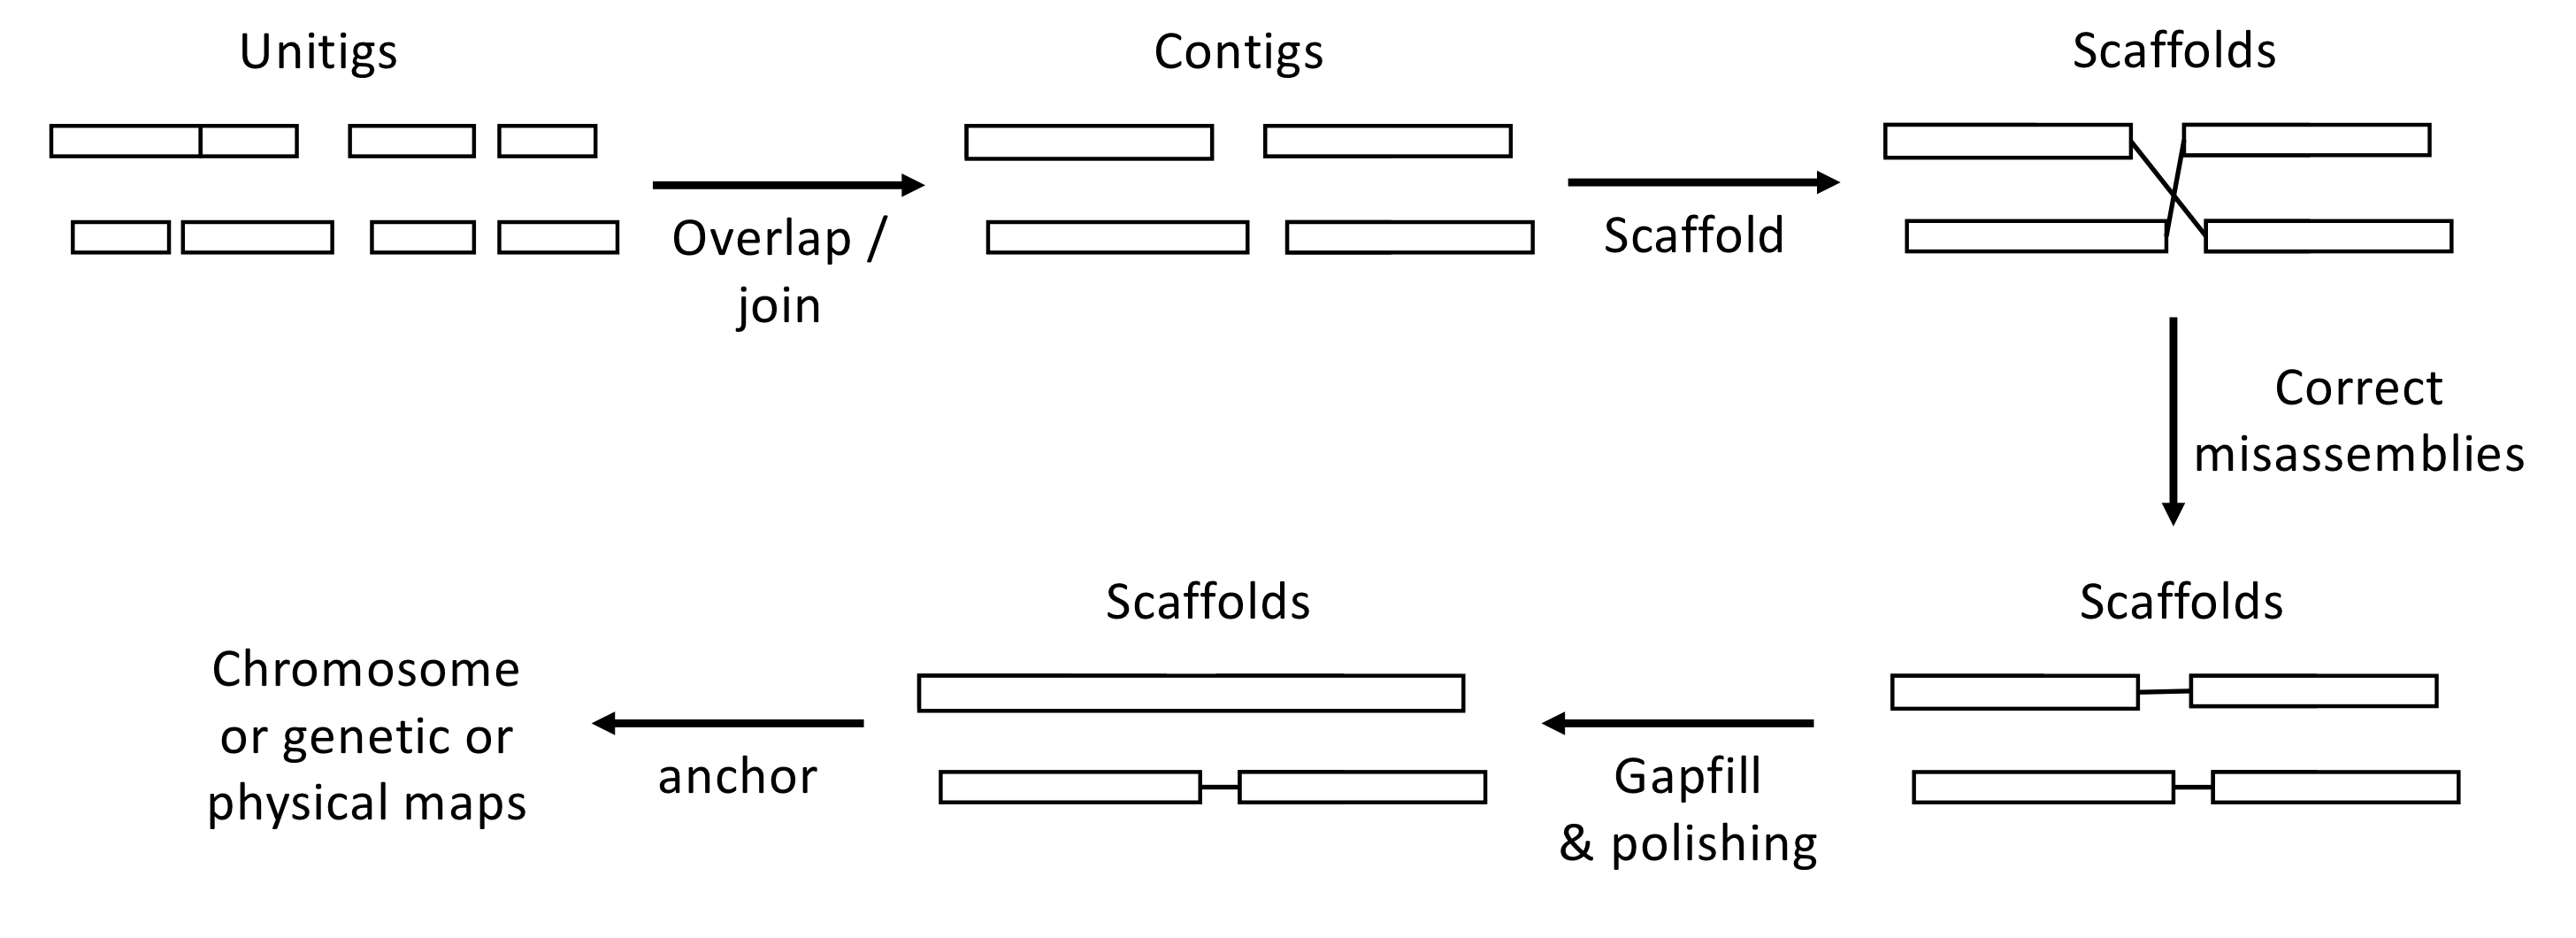 Overview of the assembly workflow. Here are few key definitions: Contig: A contiguous sequence of bases. Unitig: A type of contig for which there are no competing choices in terms of internal overlaps (they usually stop before a repeat sequence). Scaffold: A sequence of contigs separated by gaps (Ns). See PART 2 for more details.